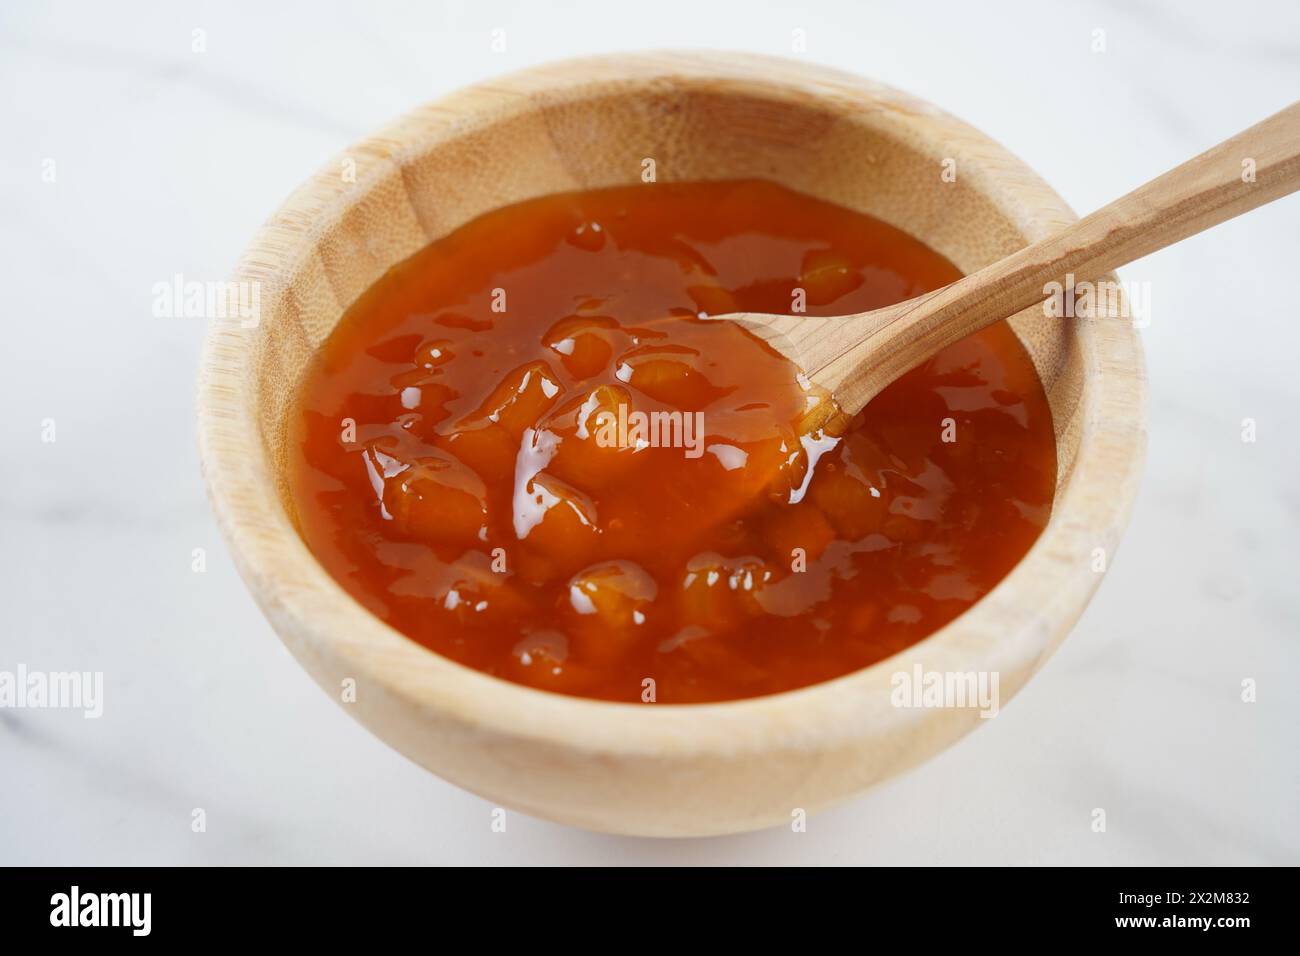 Peach jam in a wooden bowl.  Canned fruit jam with ingredients Stock Photo